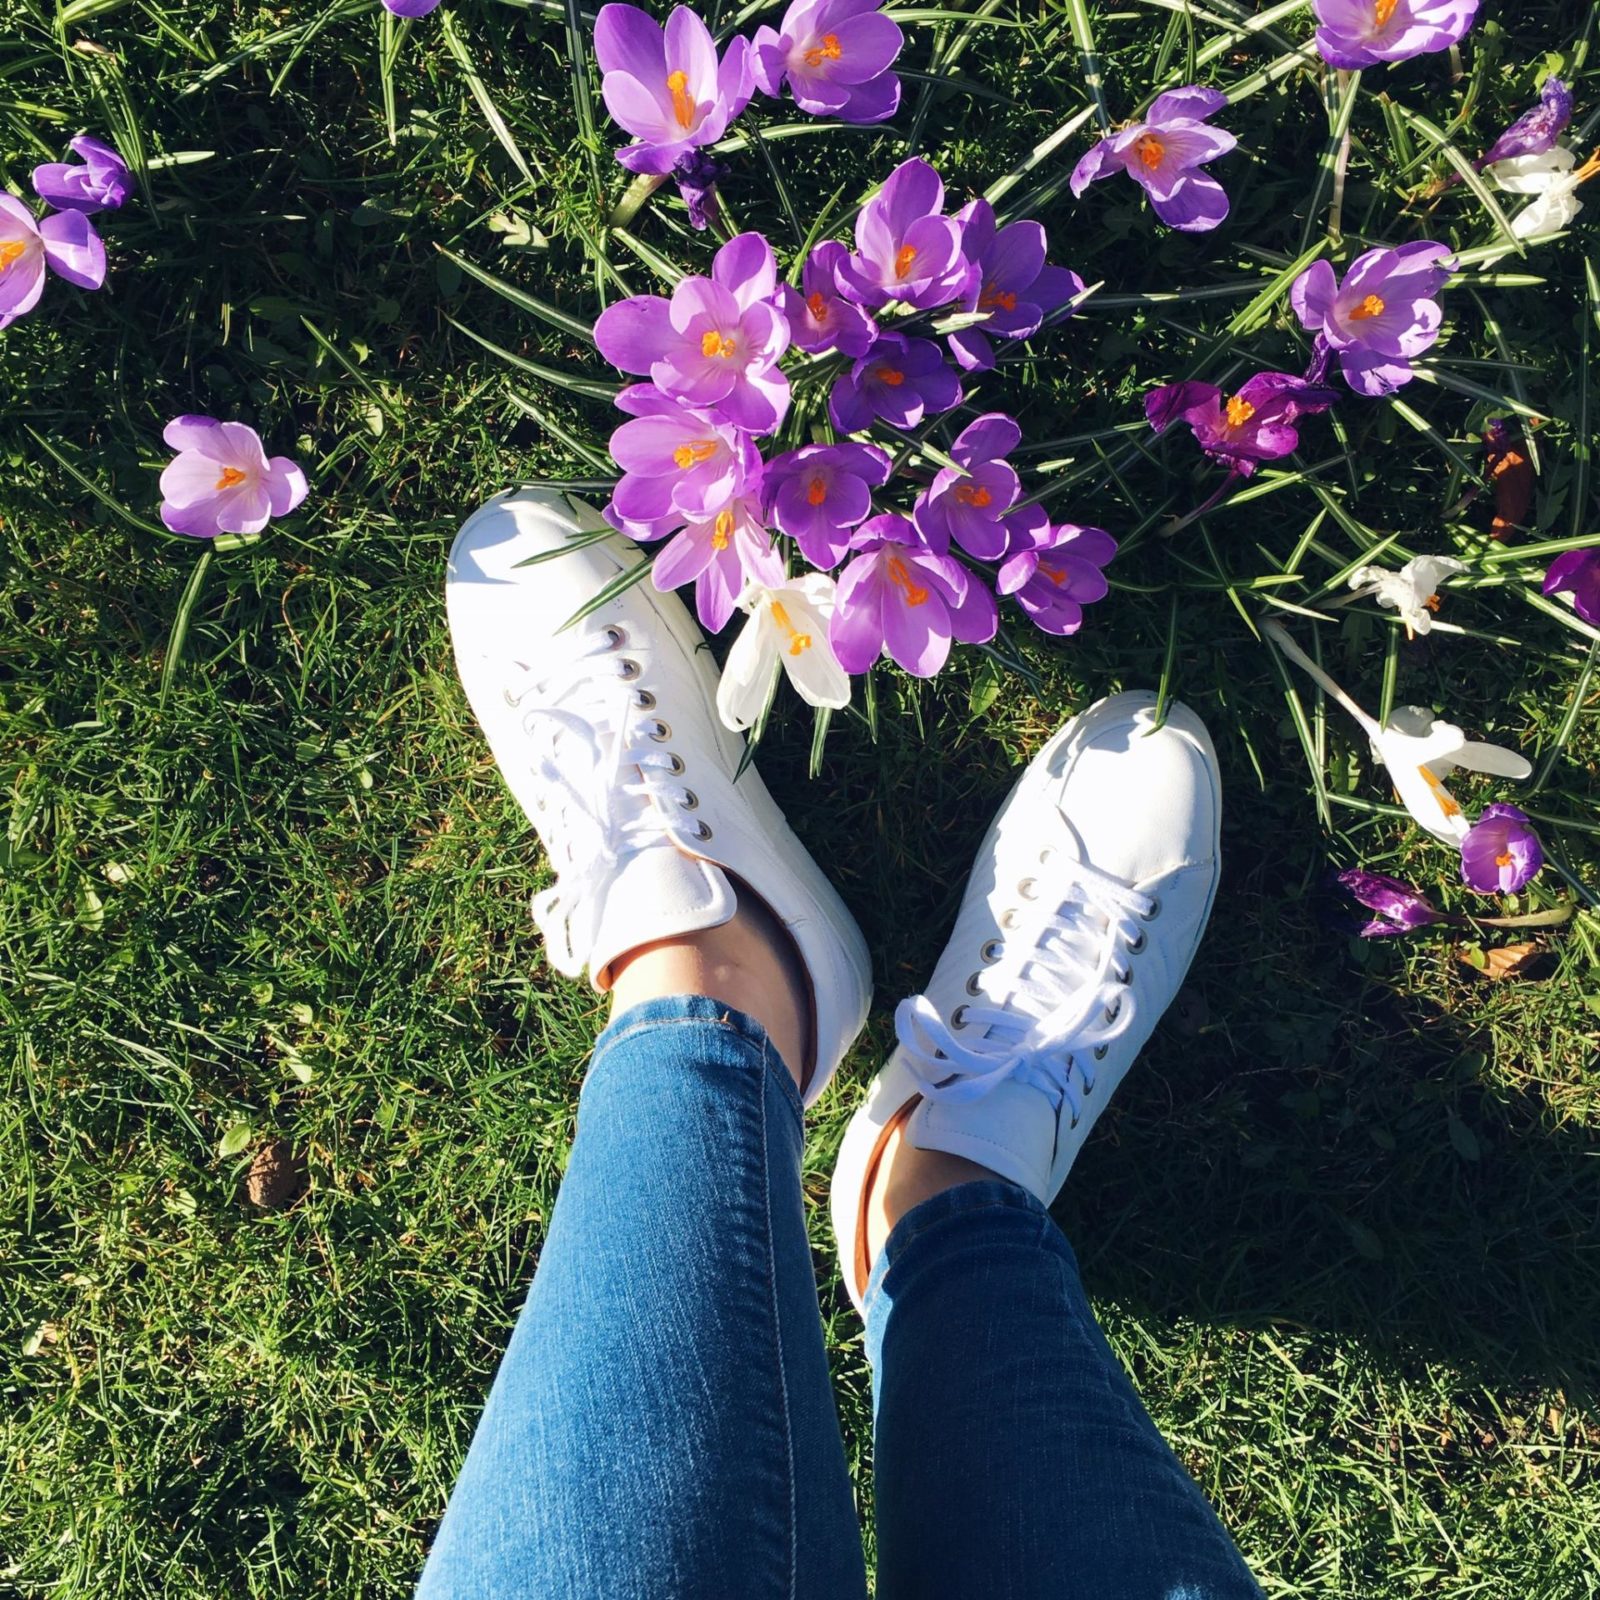 White Sneakers & Extremely Sunny Weather, Happy Spring!